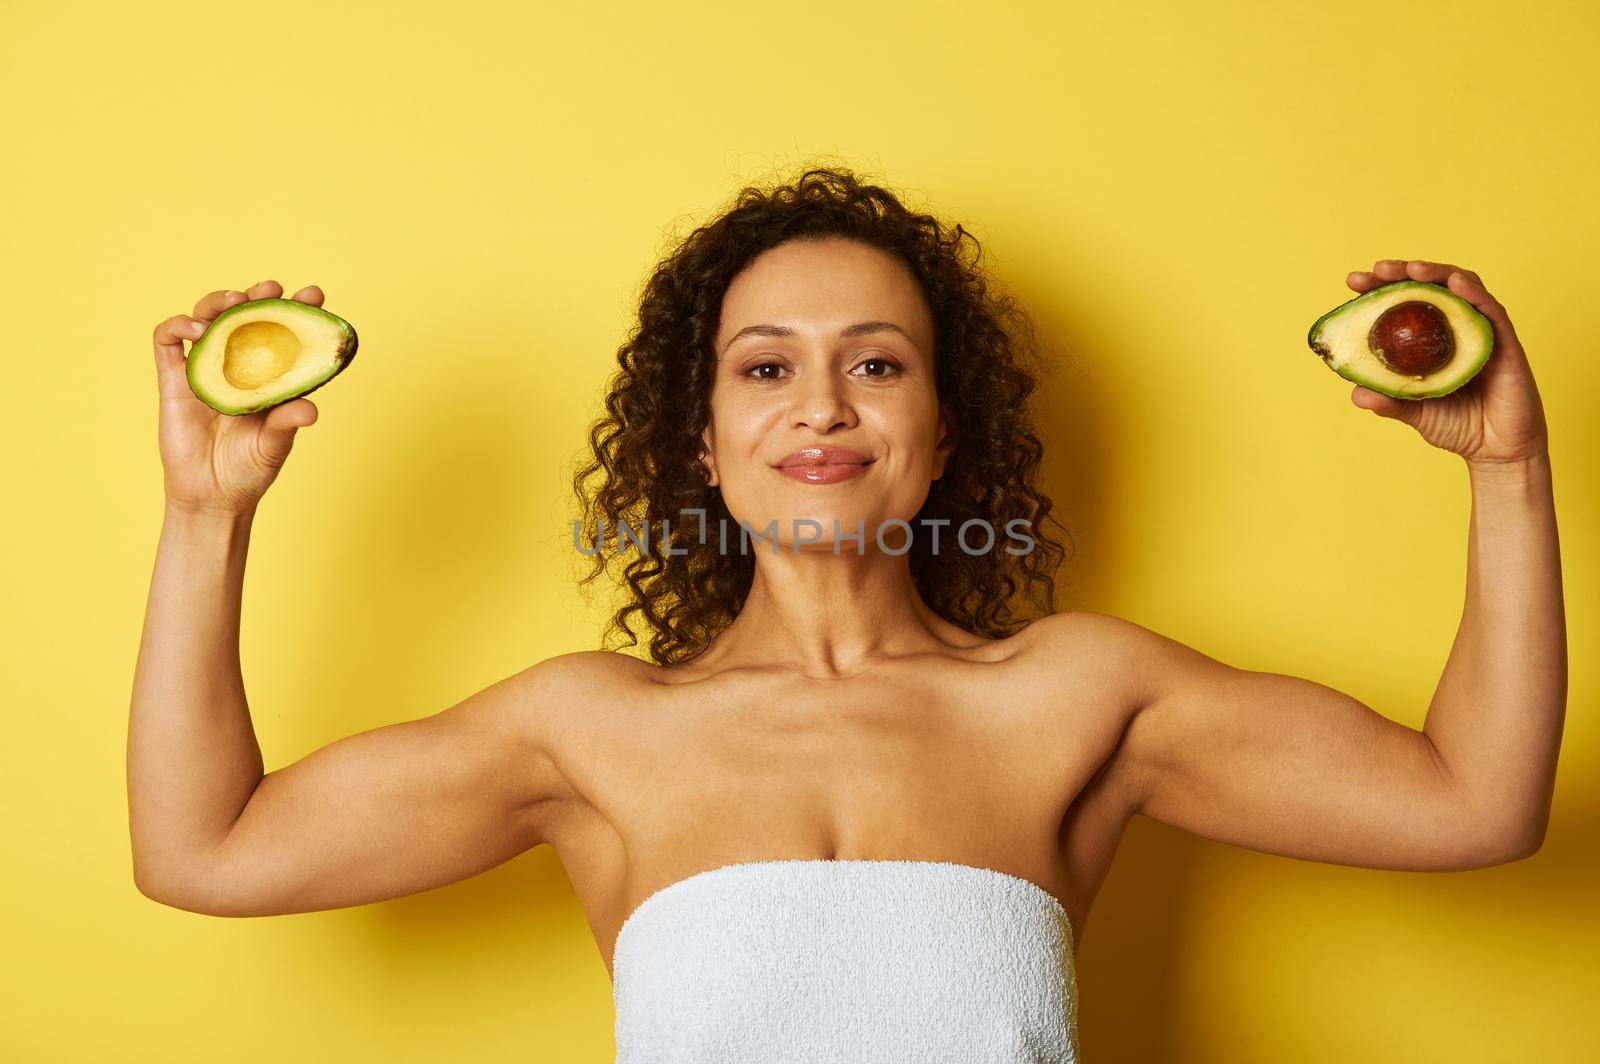 Young curly and muscular build woman wrapped in a bath towel holding two halves of ripe avocado, standing against yellow background with copy space by artgf